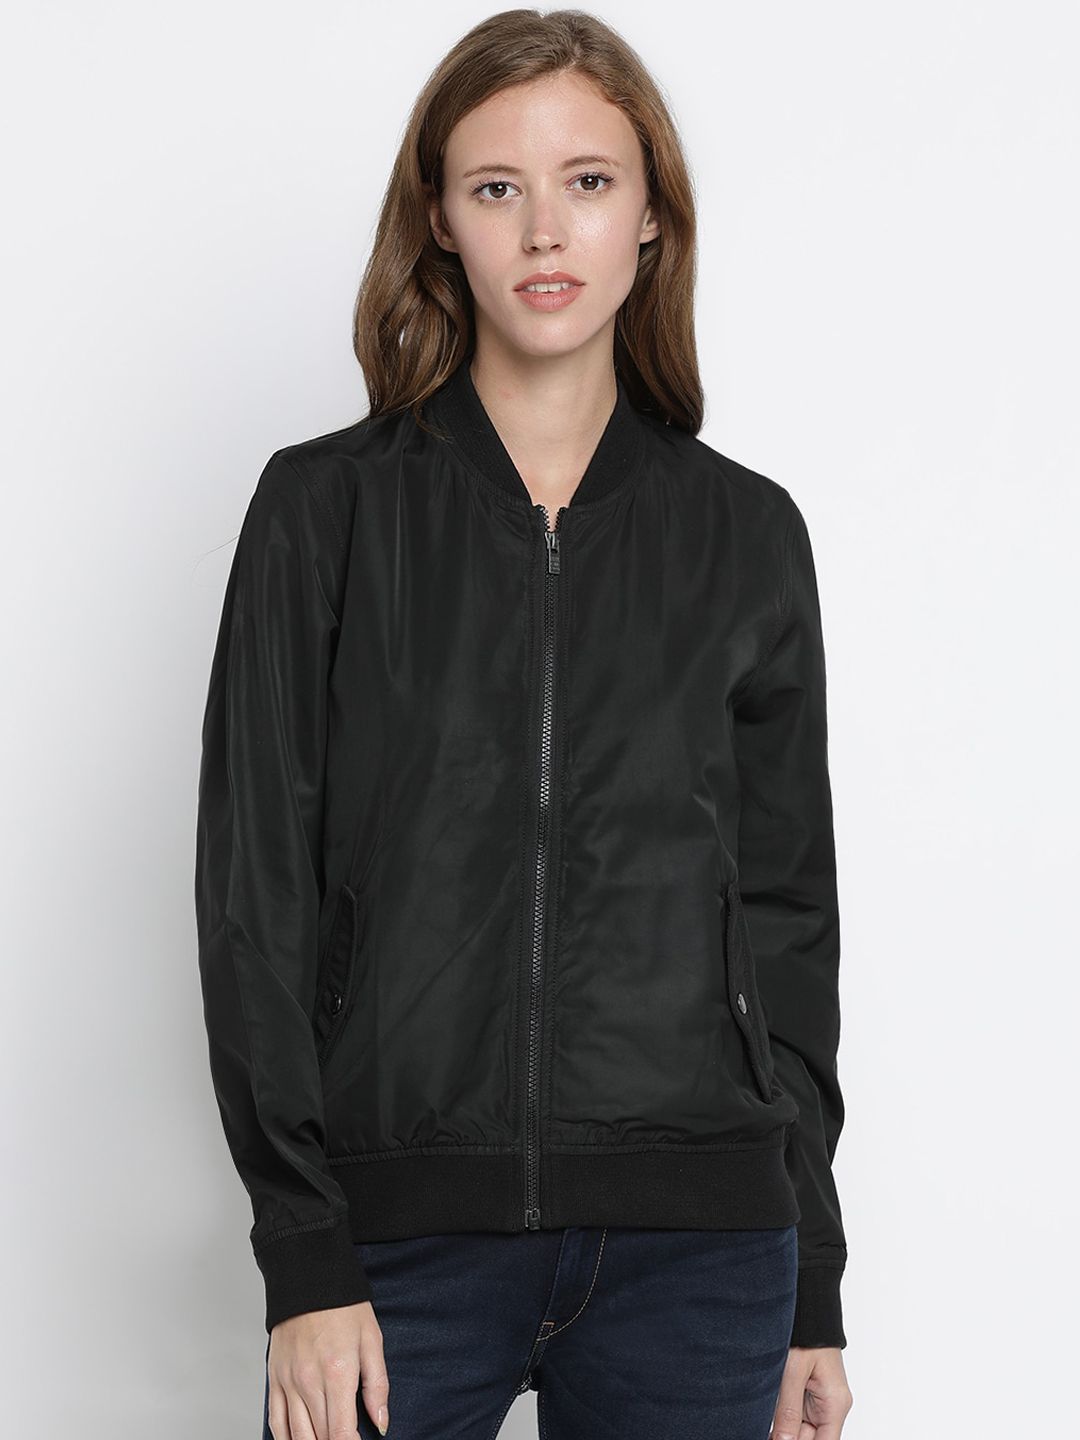 Pepe Jeans Women Black Printed Bomber Price in India